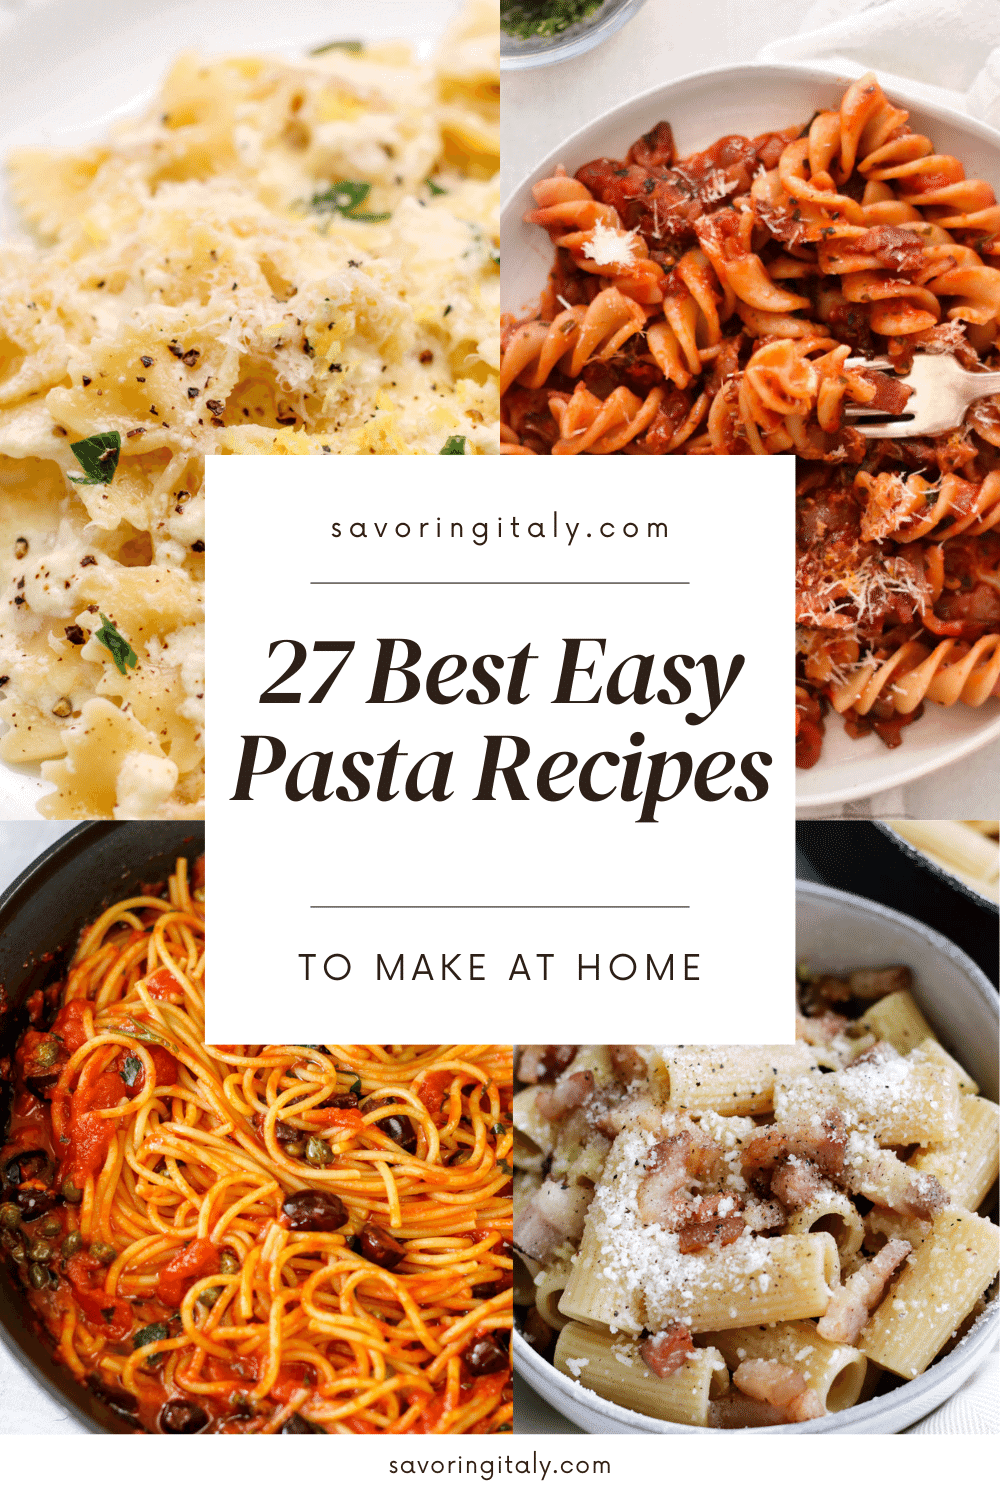 27 best easy pasta recipes to try at home.